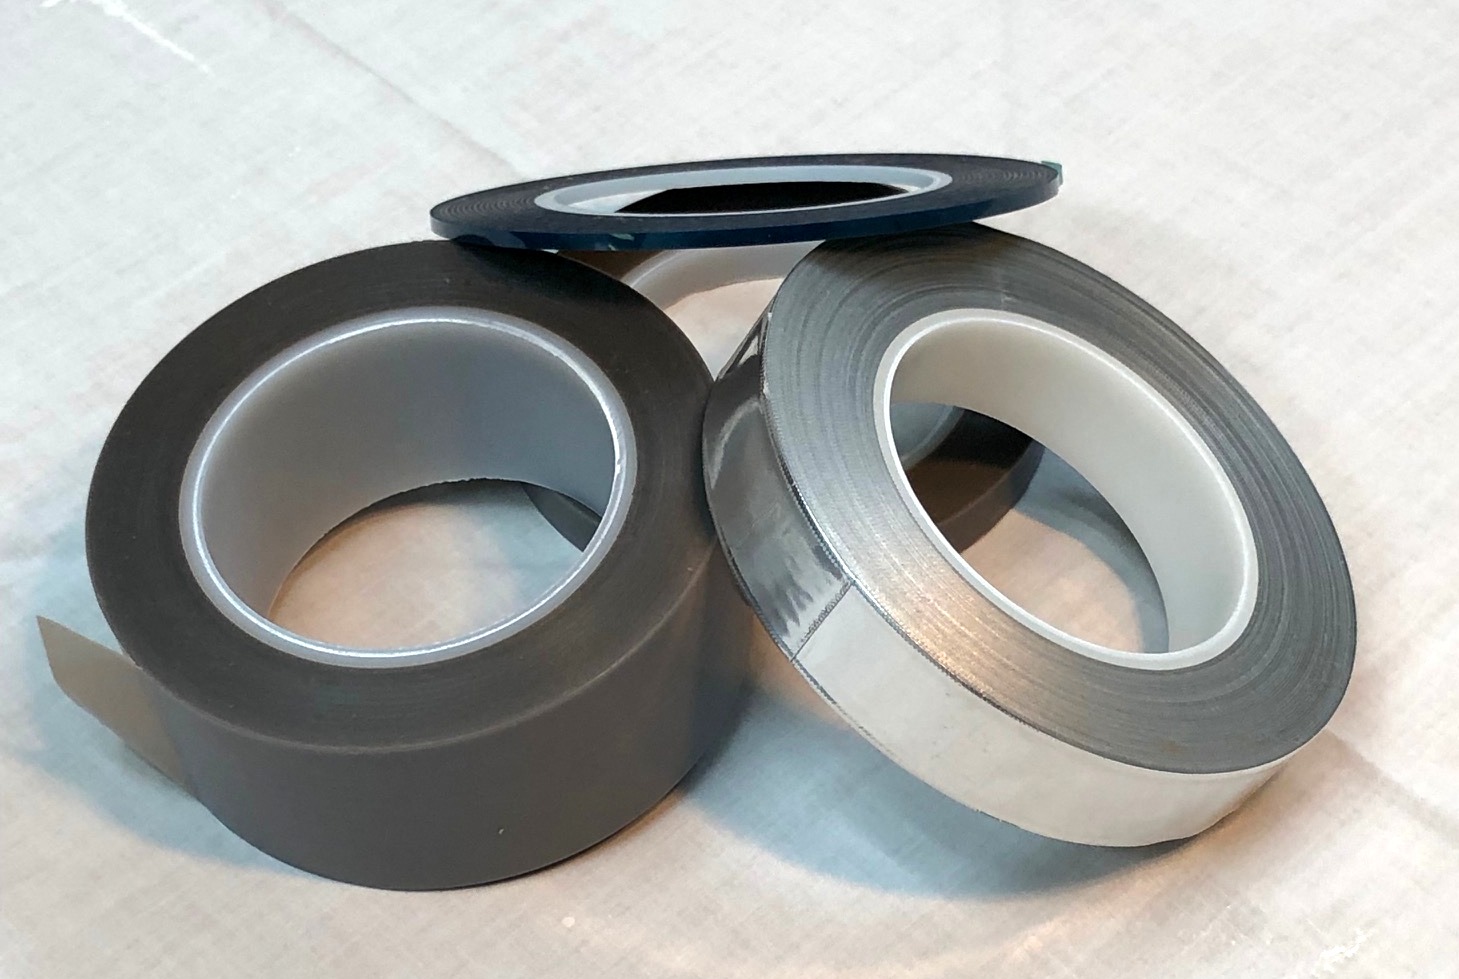 Thermal Insulating Tapes and Wraps Summary Selector